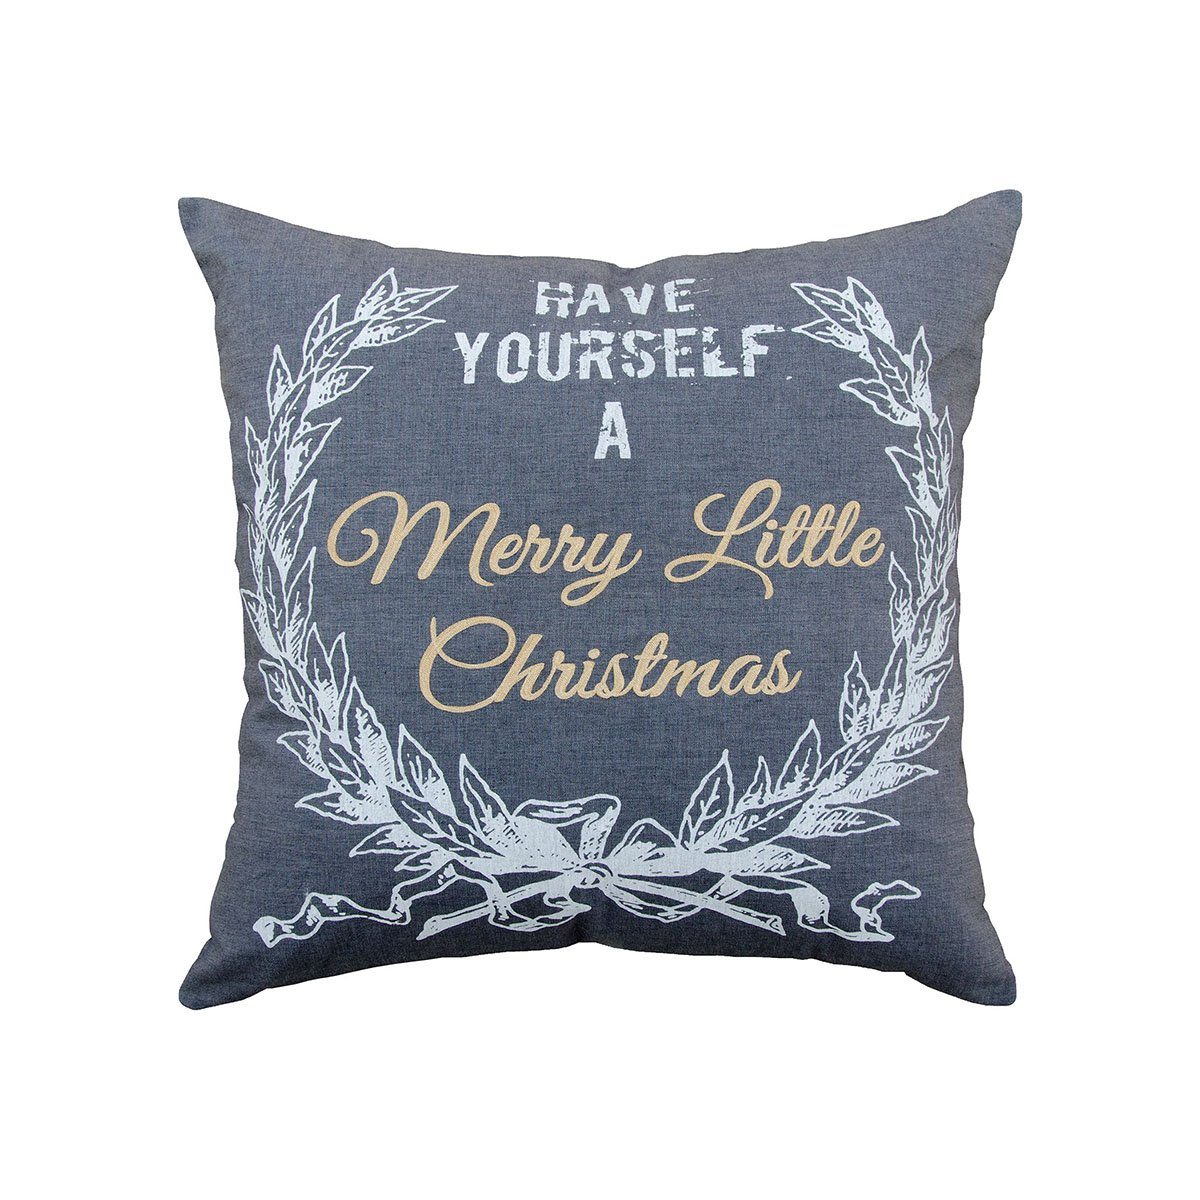 Merry Lil Christmas Pillow 24x24 Accessories Pomeroy 